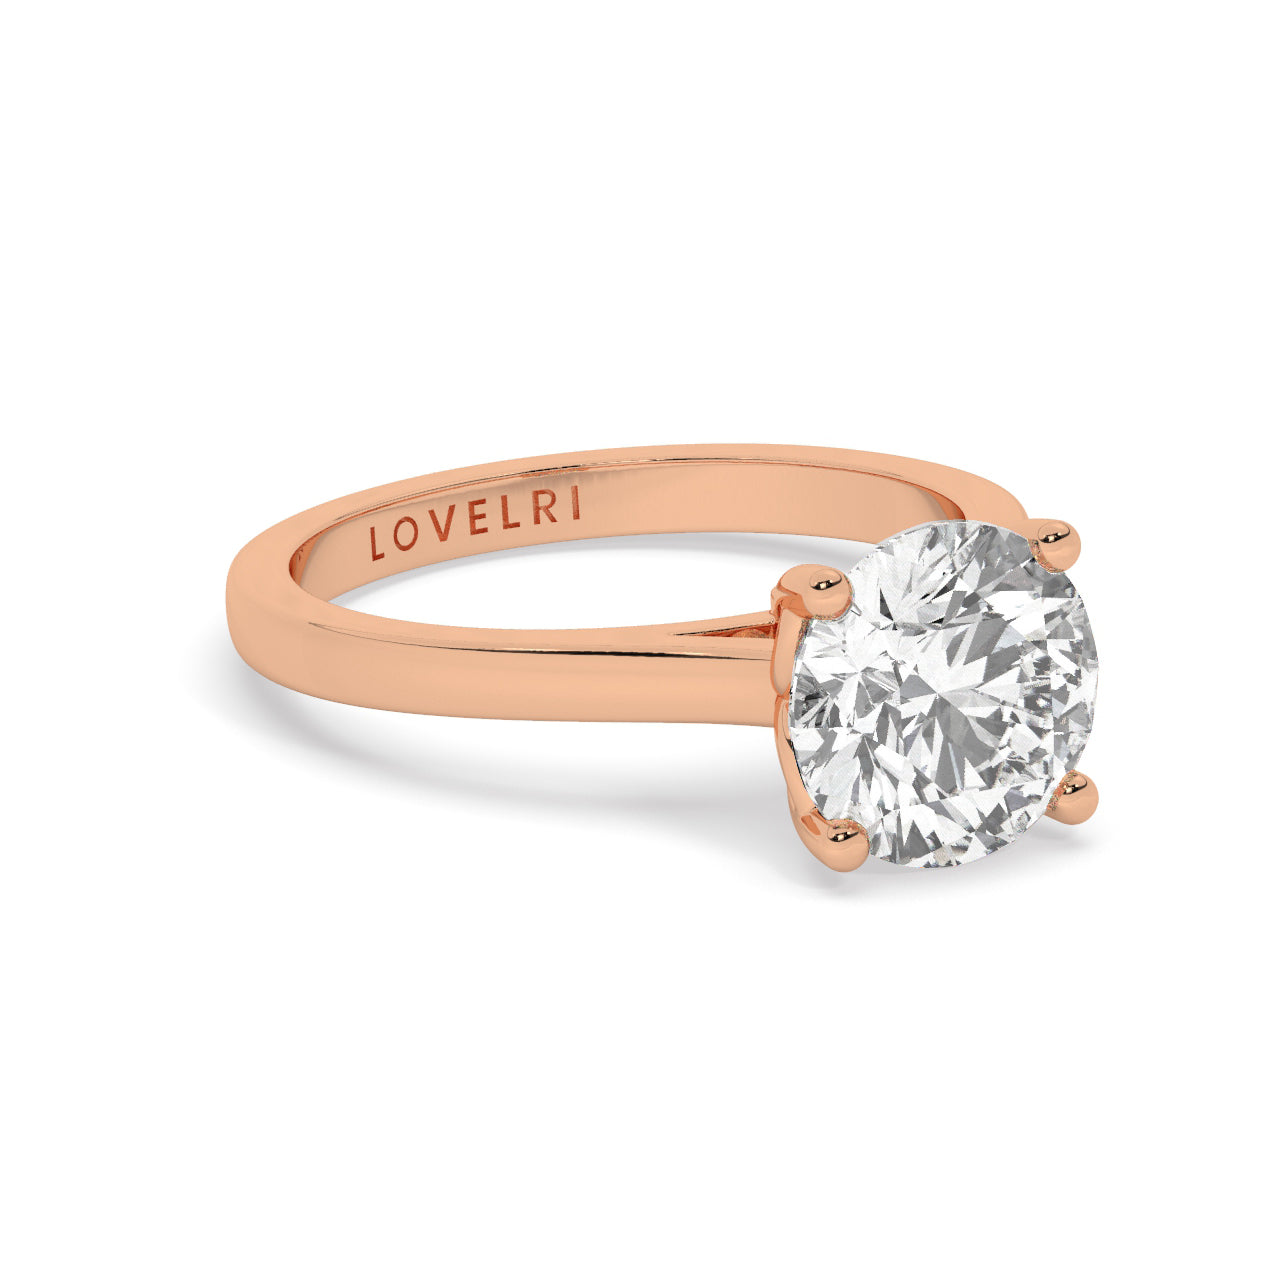 Rose Gold Round Cut Solitaire Engagement Ring with a Hidden Stone - Rotated View